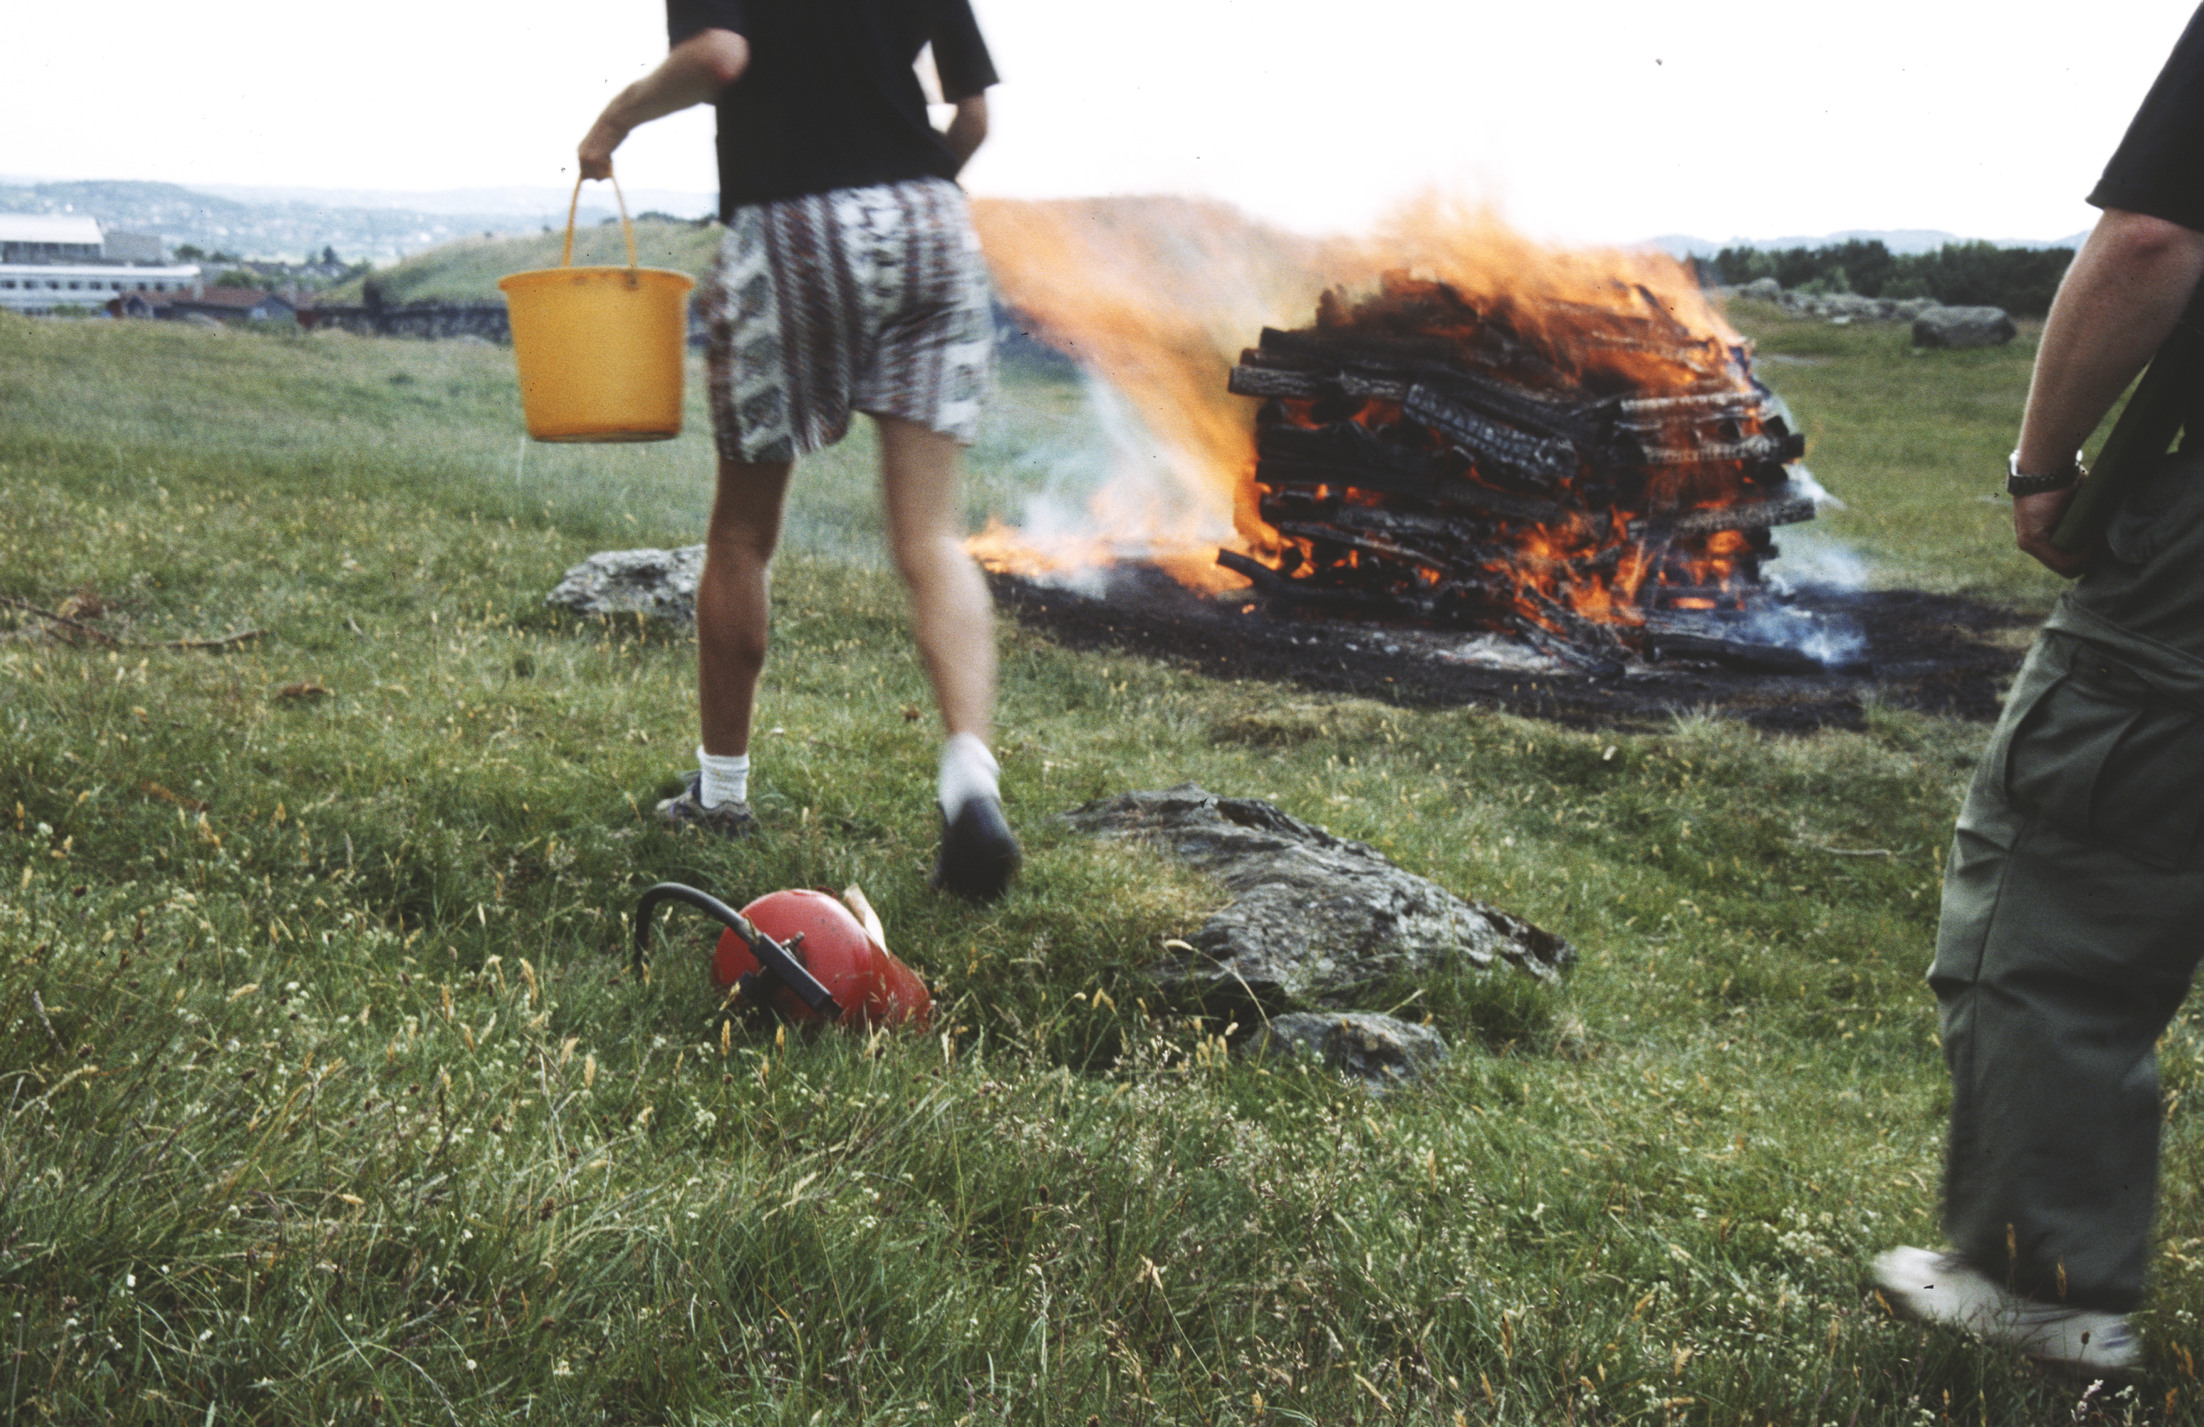 Dead In Ancient Scandinavia, Pyre Floating Fire Pit